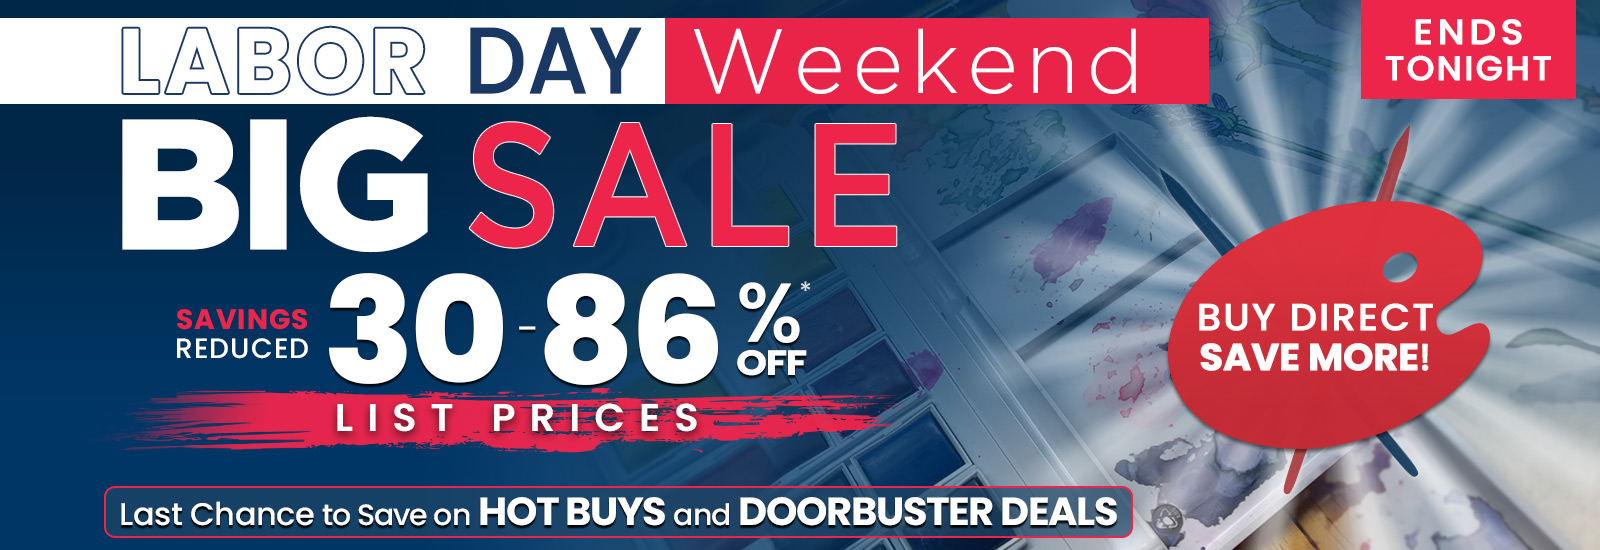 Labor Day Weekend BIG Sale - Up to 86% Off List Prices